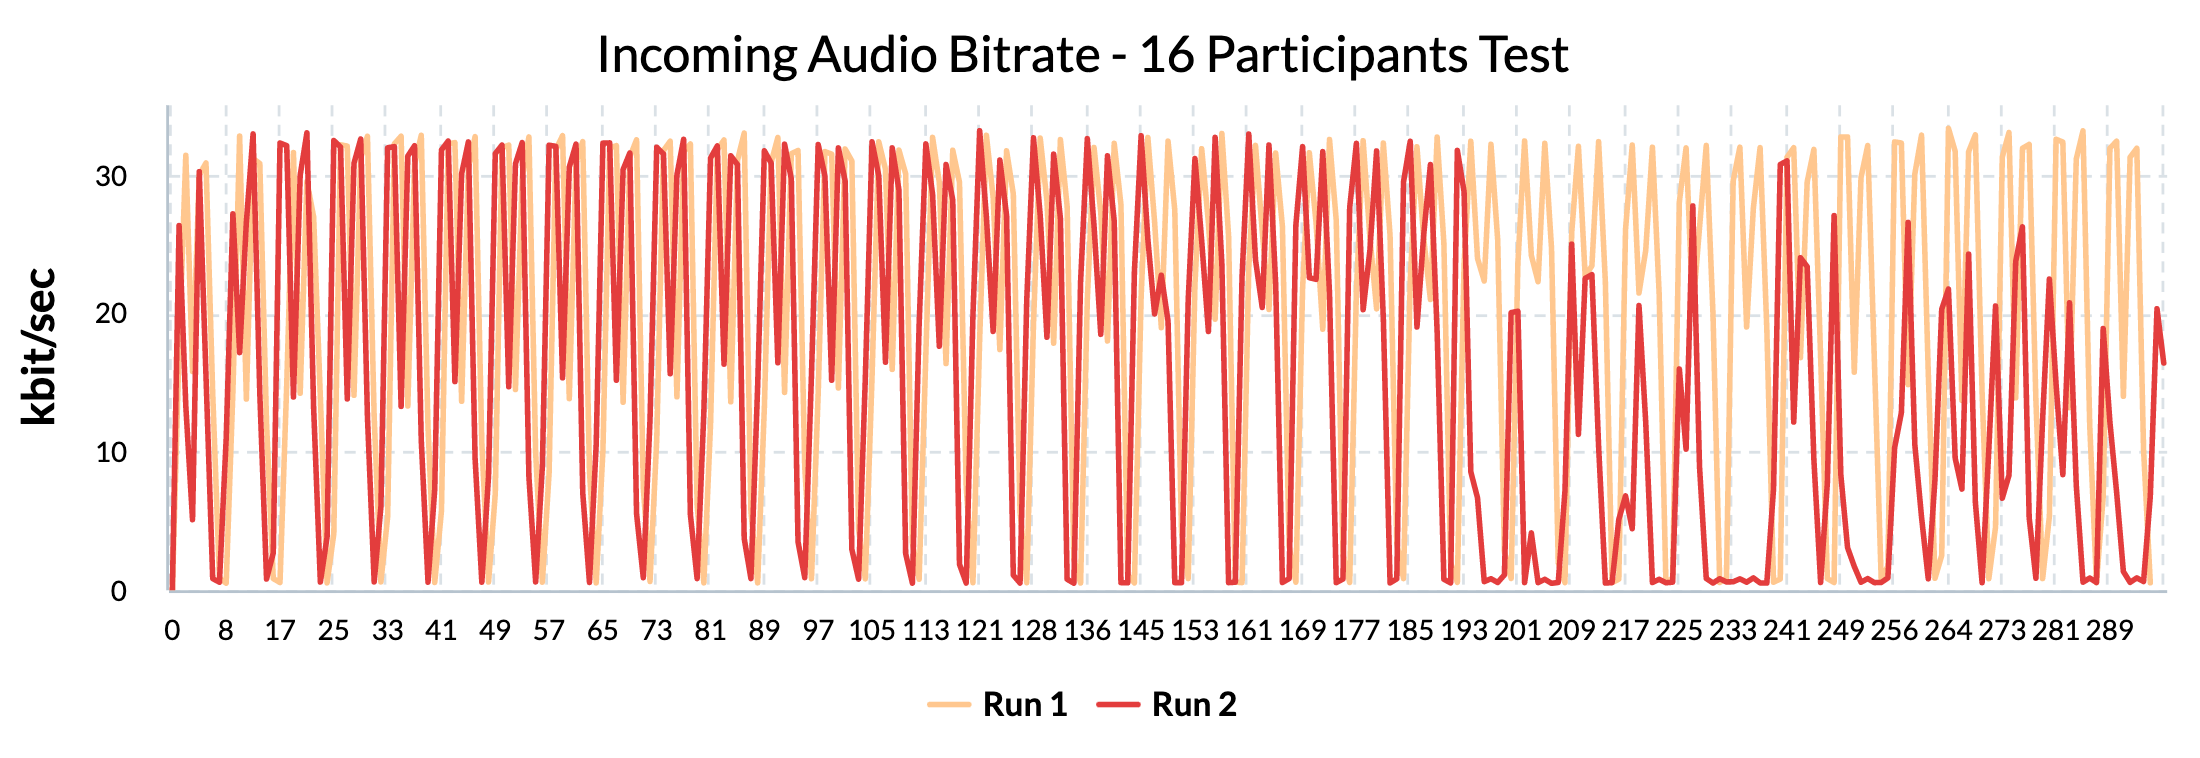 Incoming Audio Bitrate - 16 Participants Test